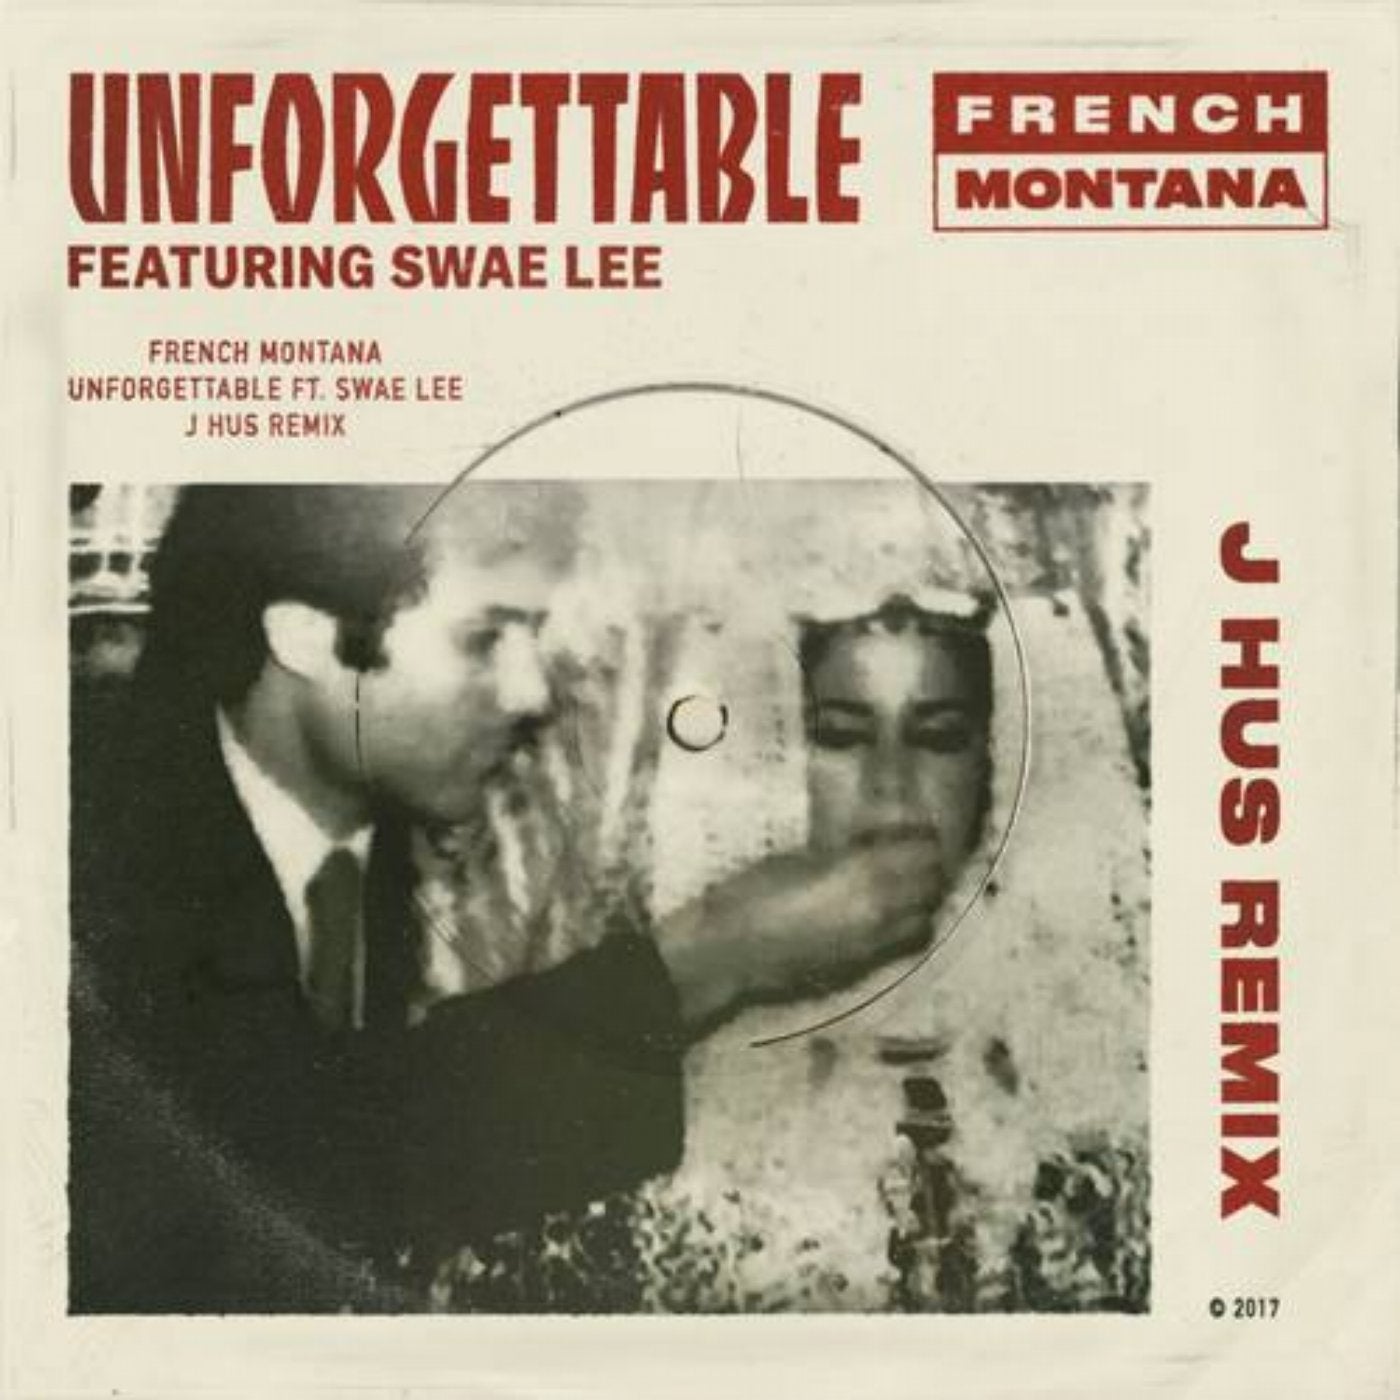 French montana swae. Unforgettable French Montana обложка. Unforgettable French Montana feat. Swae. Swae Lee Unforgettable. Unforgettable (feat. Swae Lee).